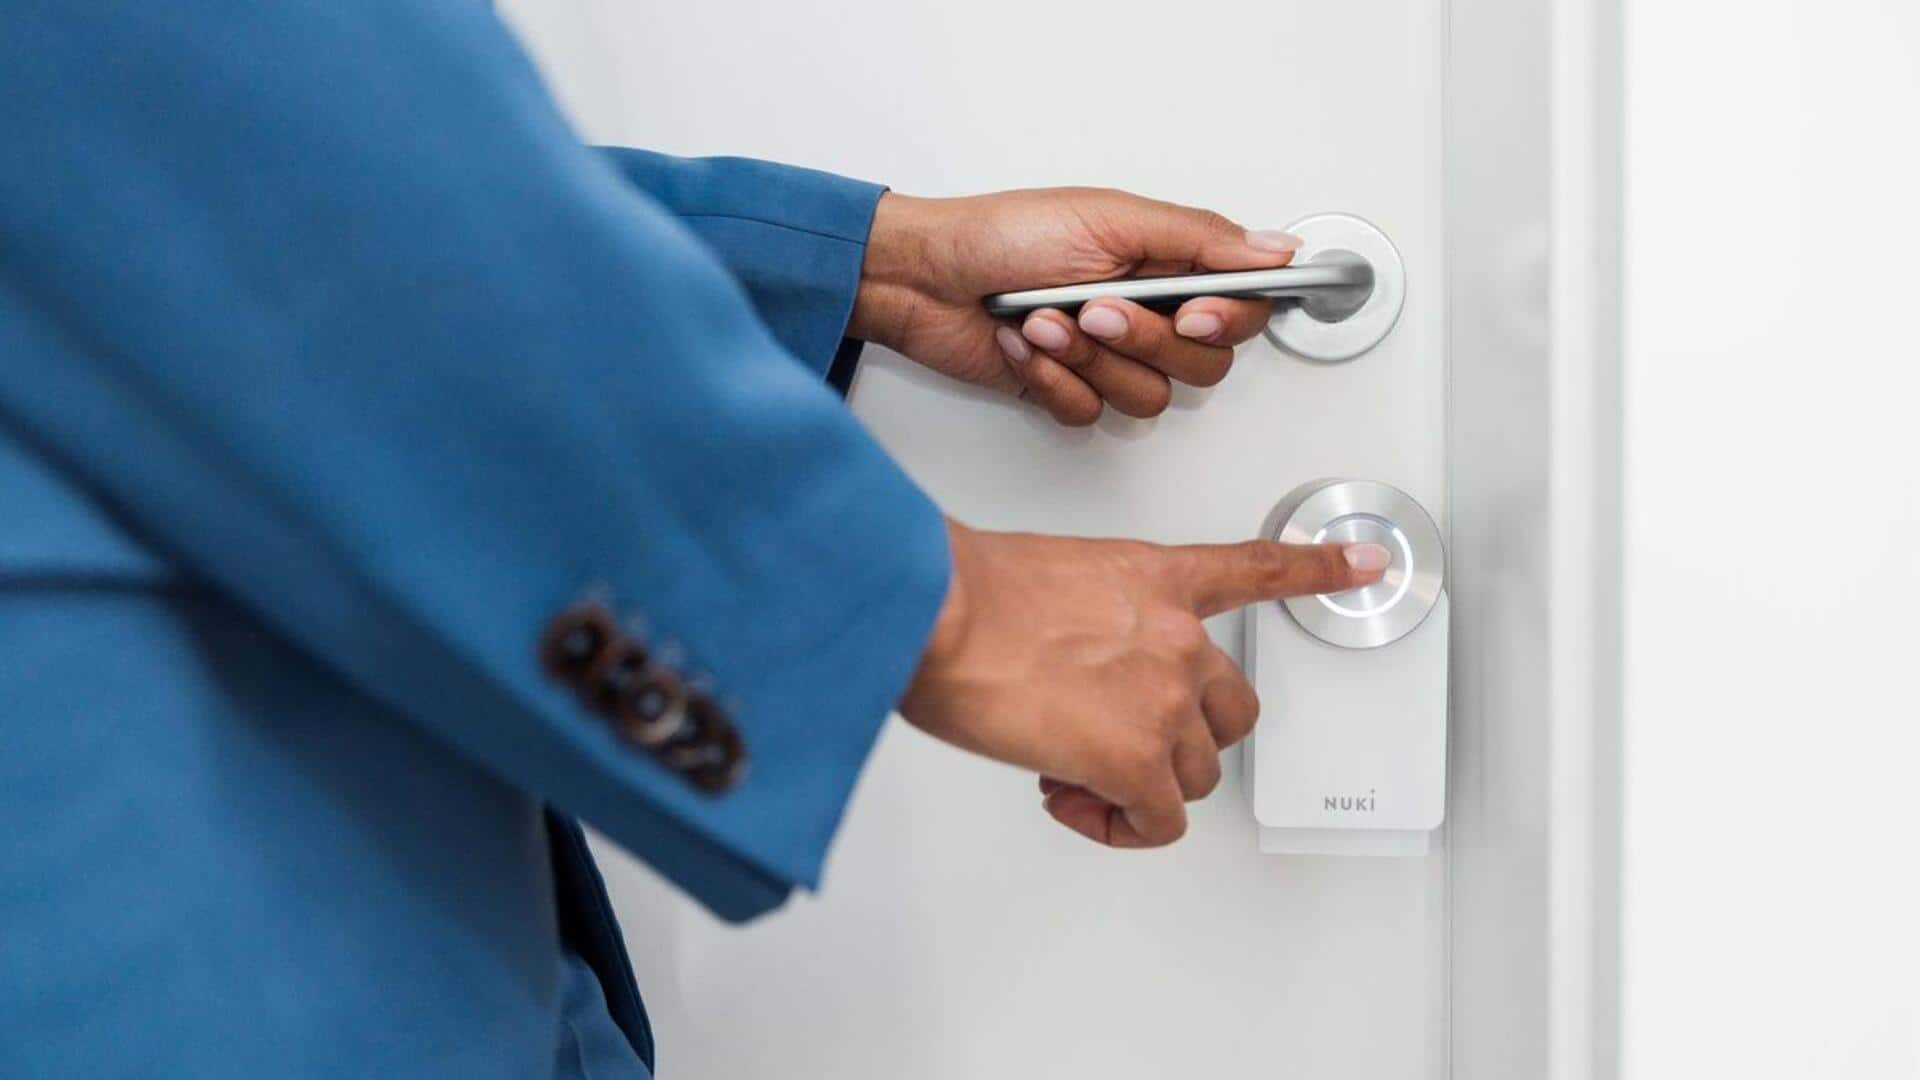 Nuki launches world's first Matter-over-Thread smart lock: Check features